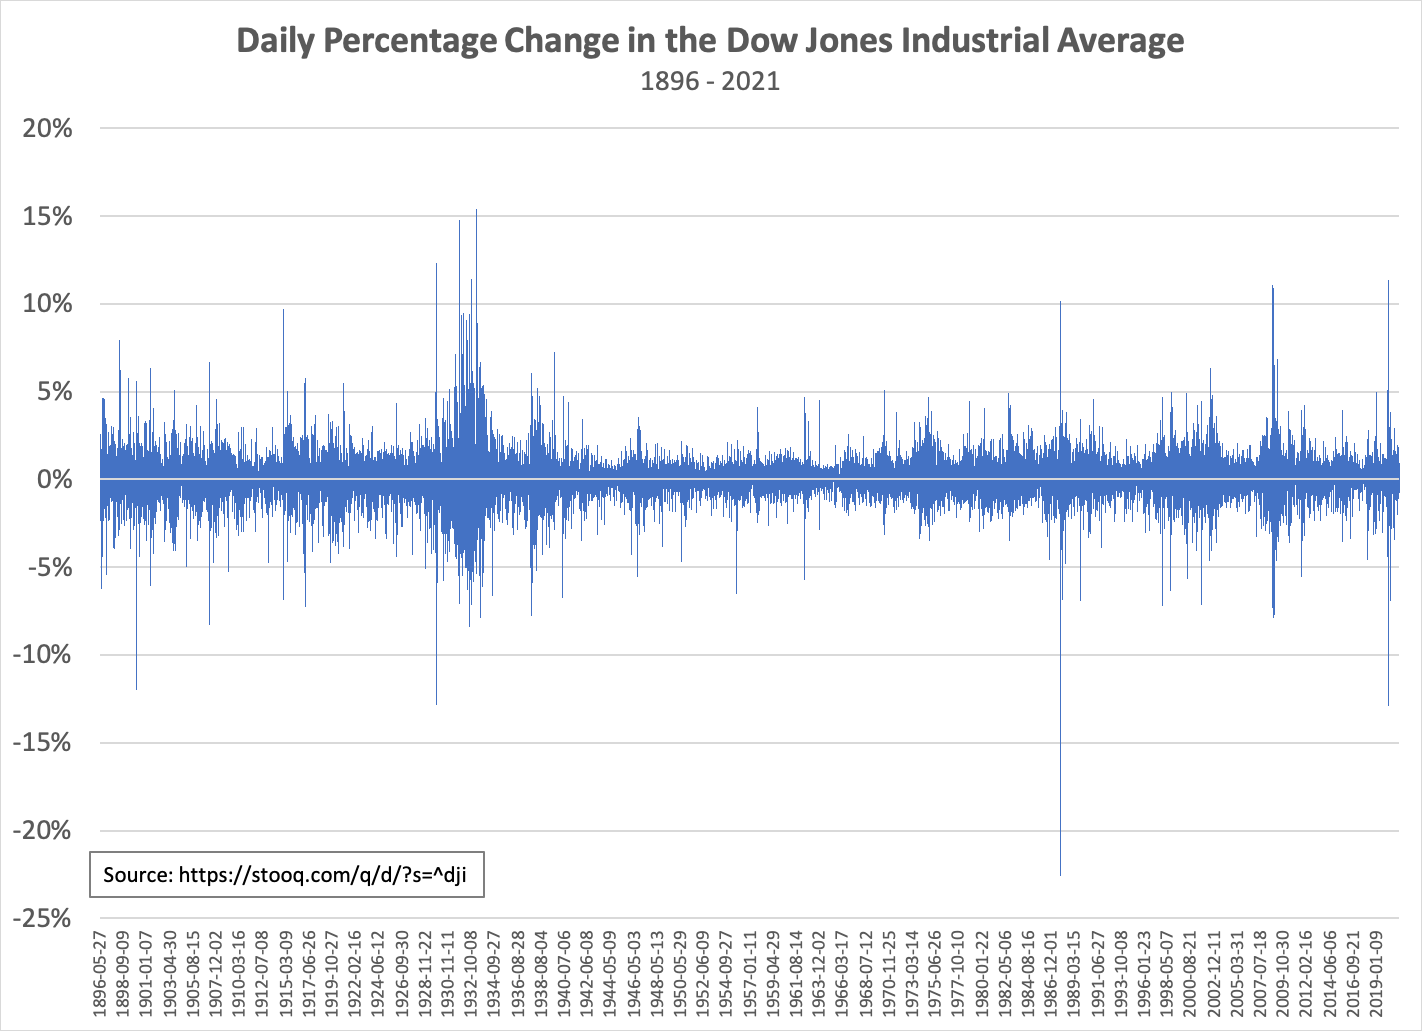 Image showing Daily percentage change in the Dow Jones Industrial Average 1896-2021